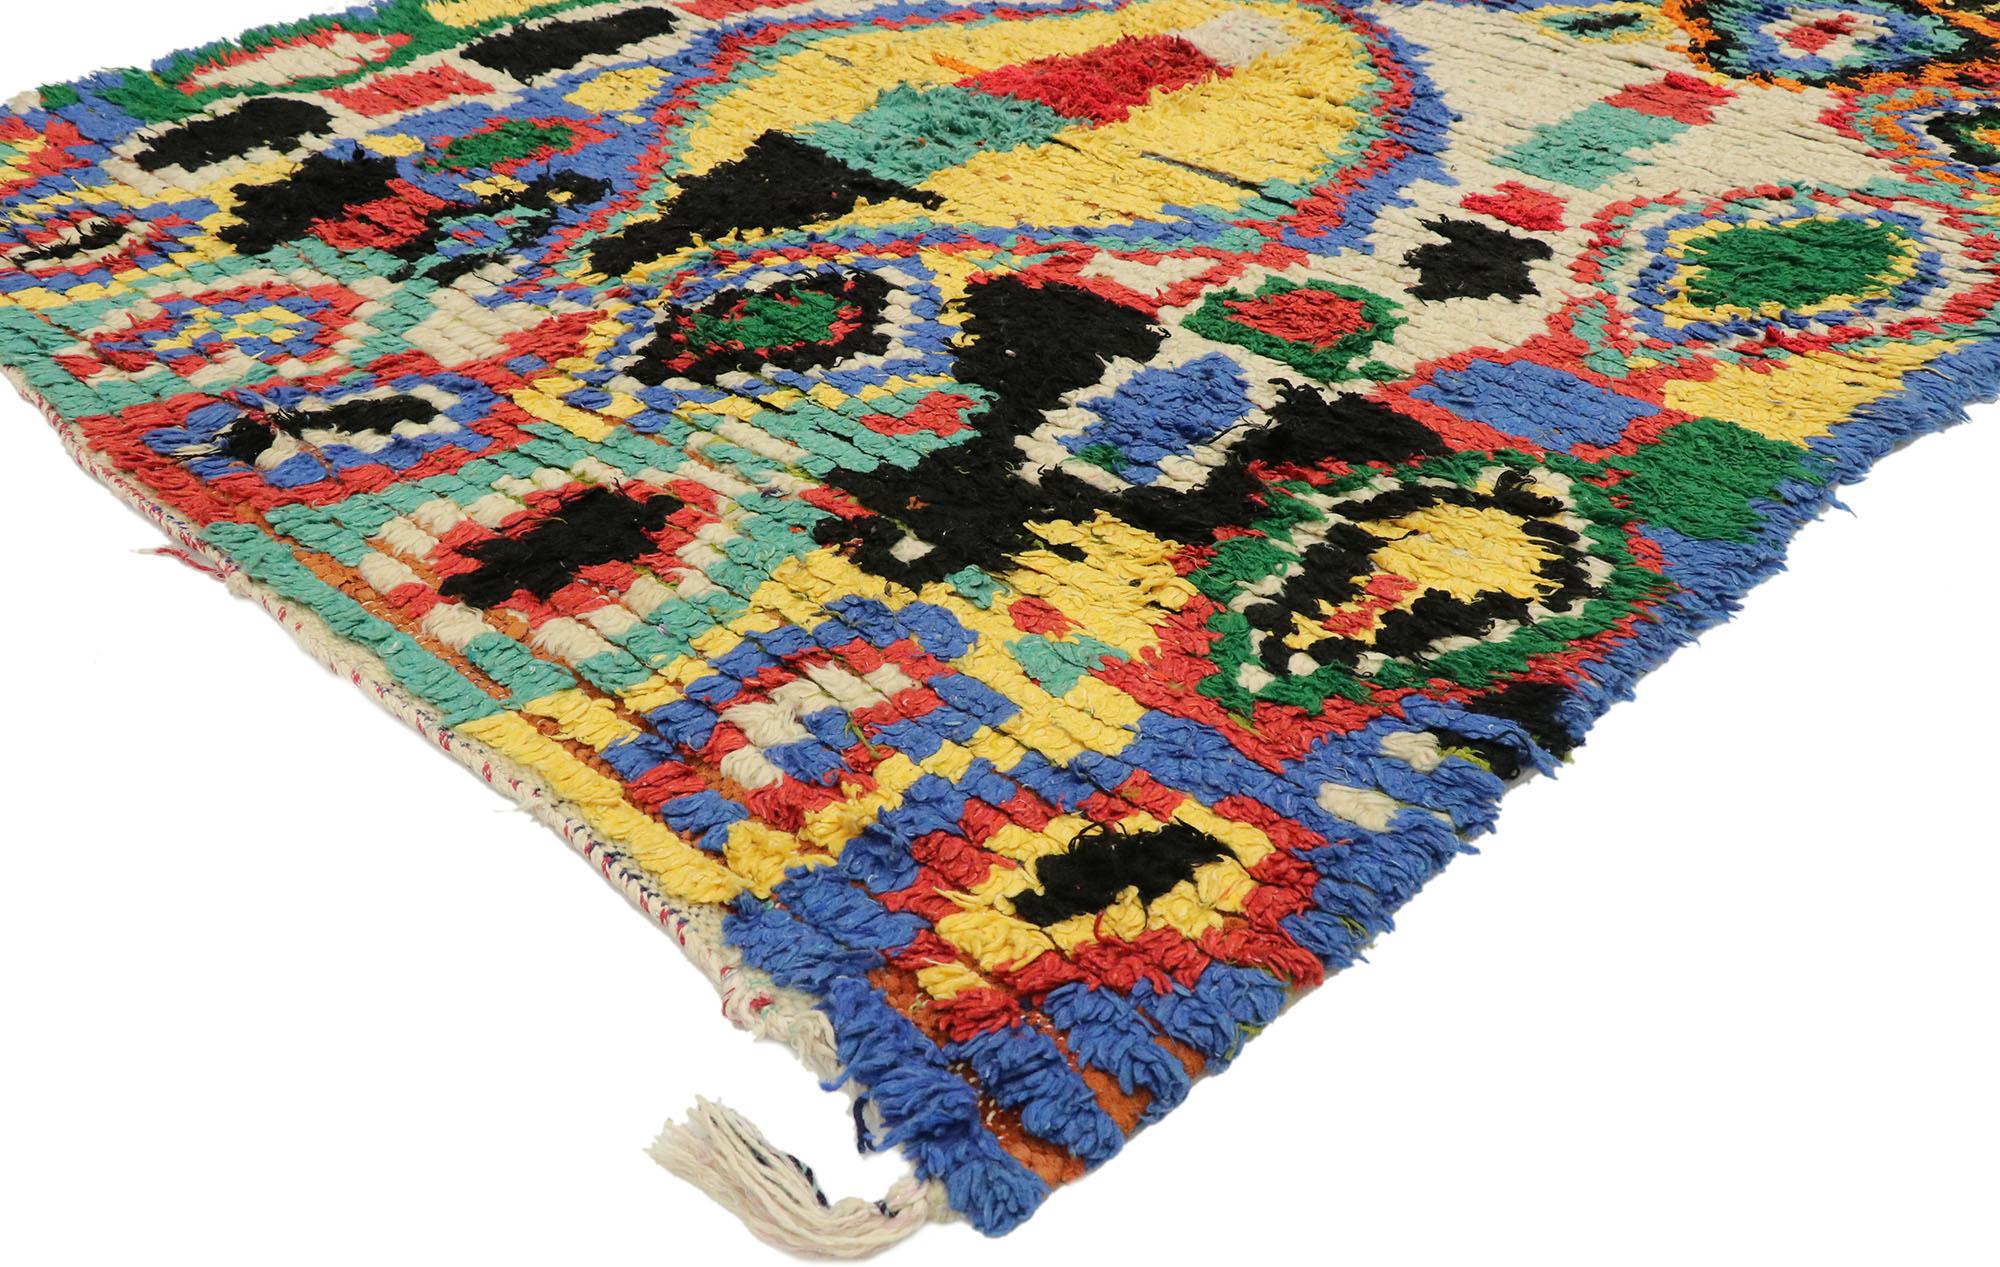 20099, vintage Berber Moroccan Azilal rug Postmodern abstract expressionism. Displaying asymmetrical spontaneity and vibrant colors, this hand knotted wool vintage Berber Moroccan Azilal rug beautifully embodies Postmodern Abstract Expressionism.